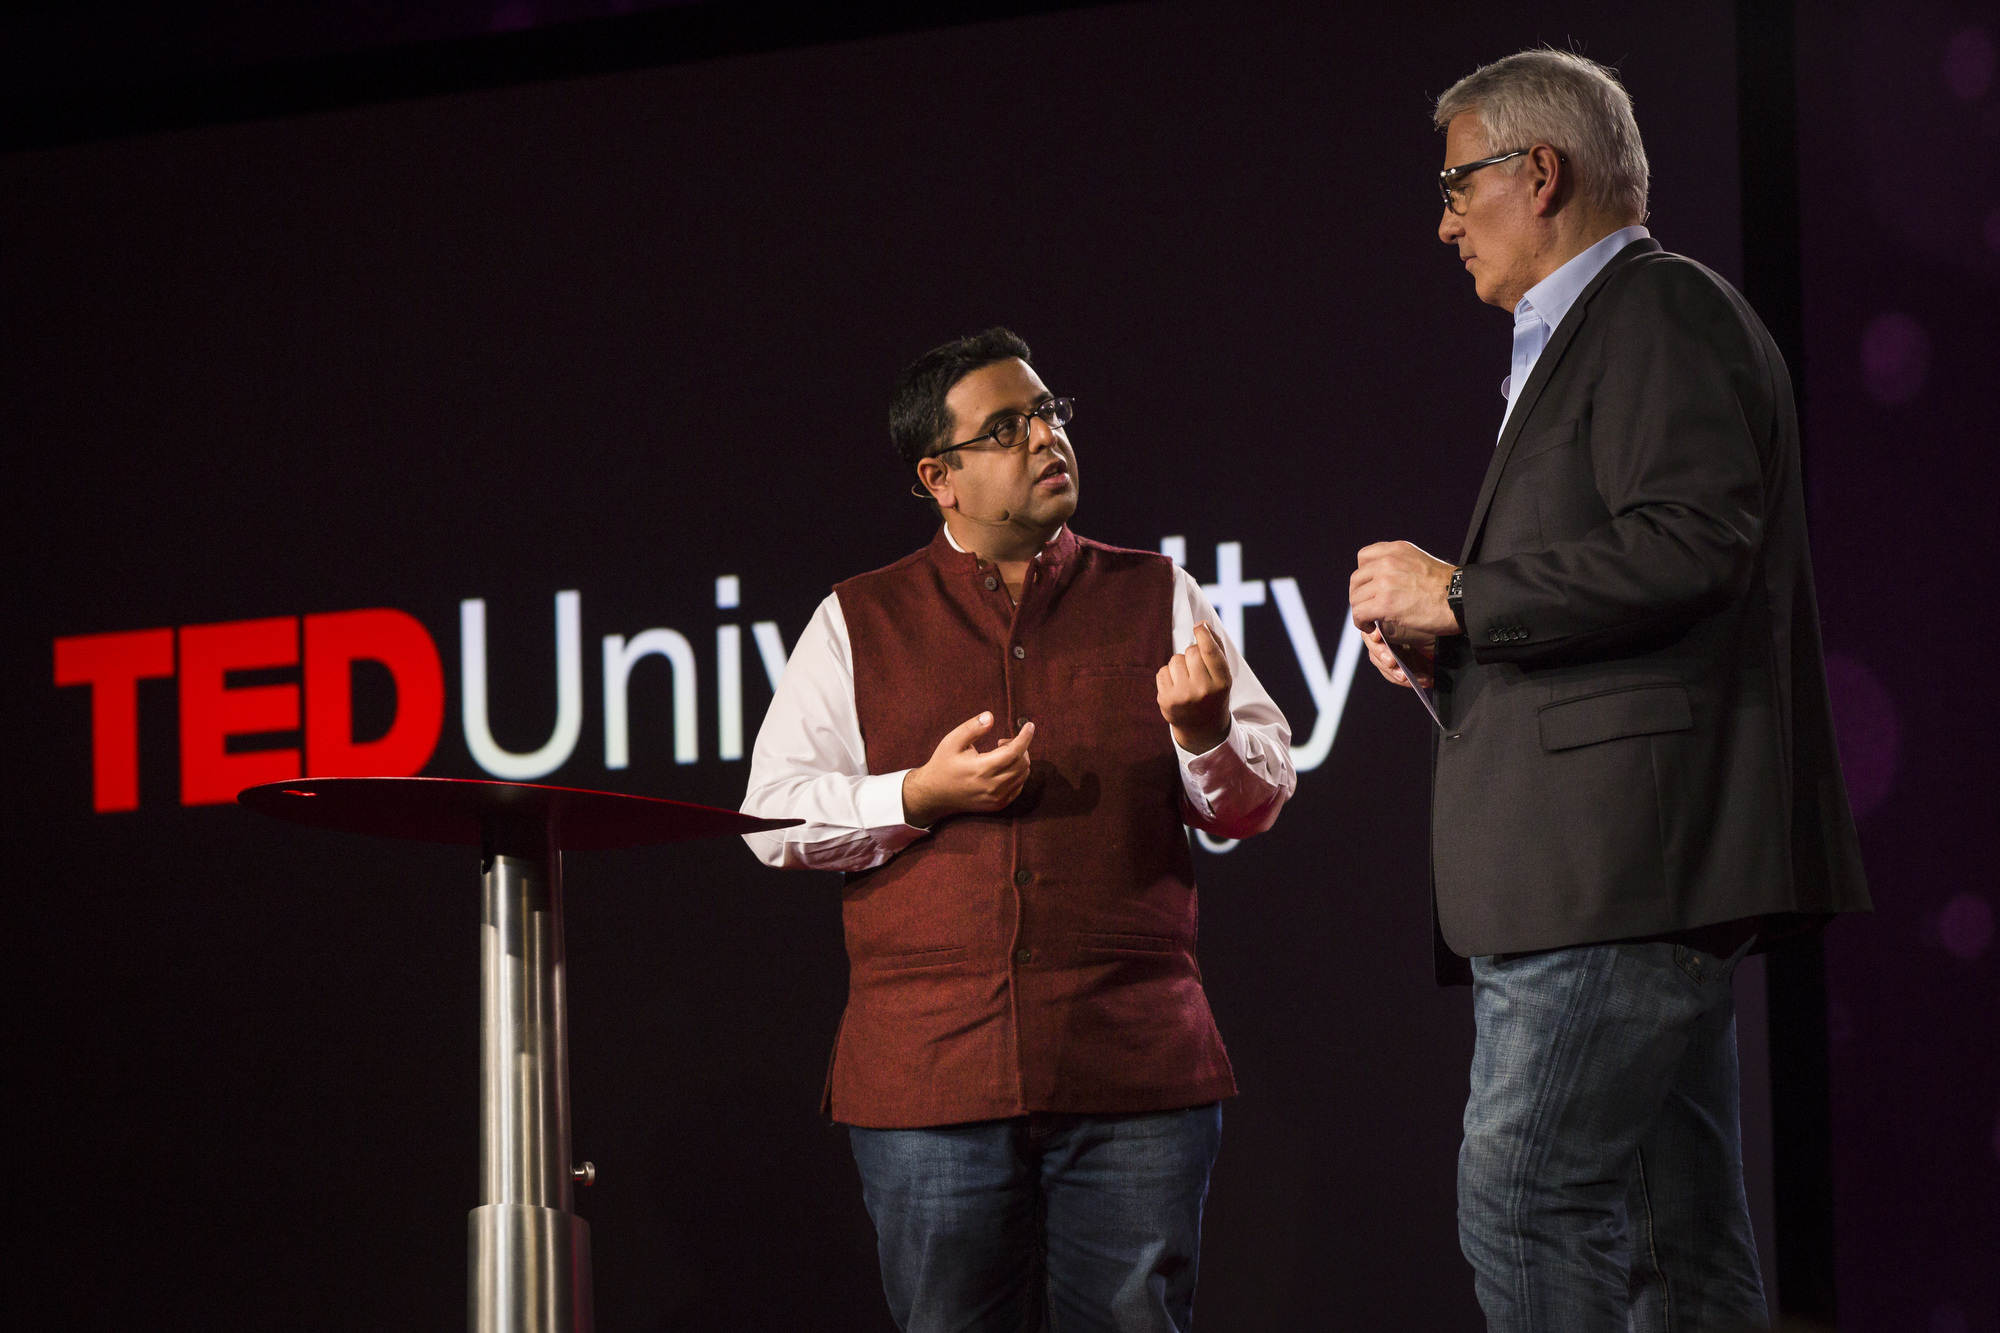 Nikhil Pahwa at TED University. TED2016. February 15-19, 2016, Vancouver Convention Center, Vancouver, Canada. Photo: Ryan Lash / TED